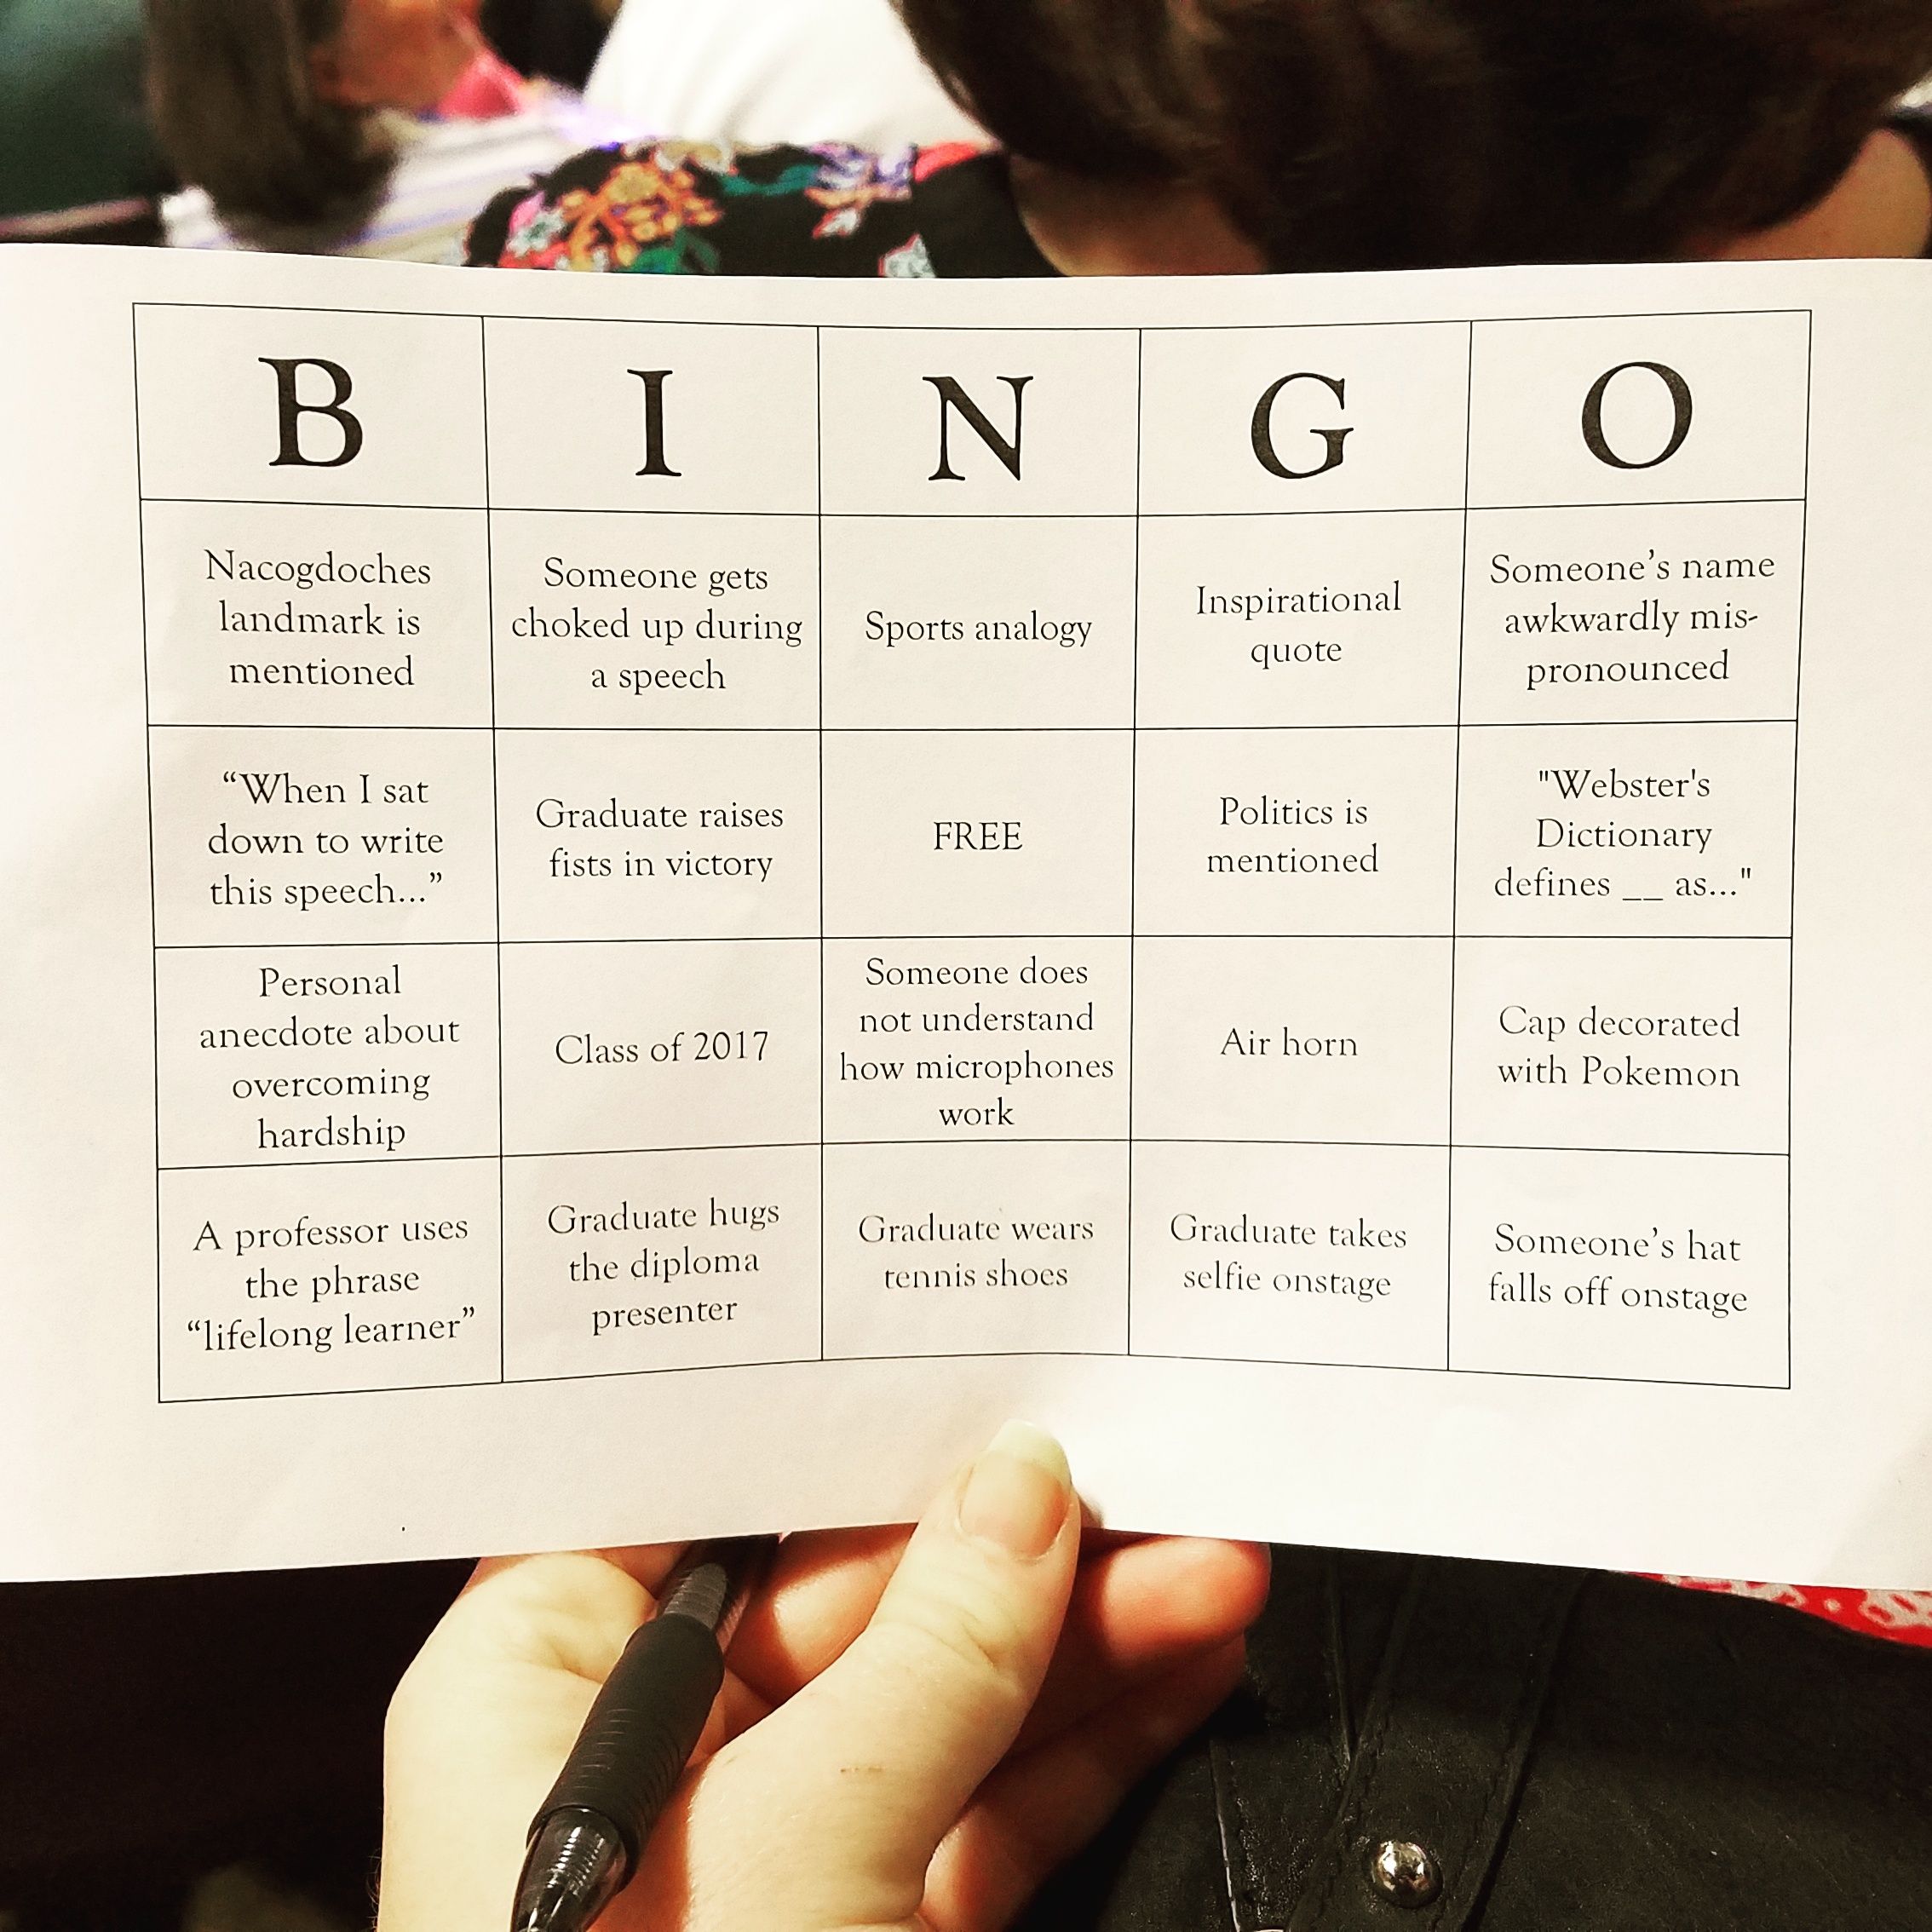 My family played bingo during my brother's graduation to pass the time.